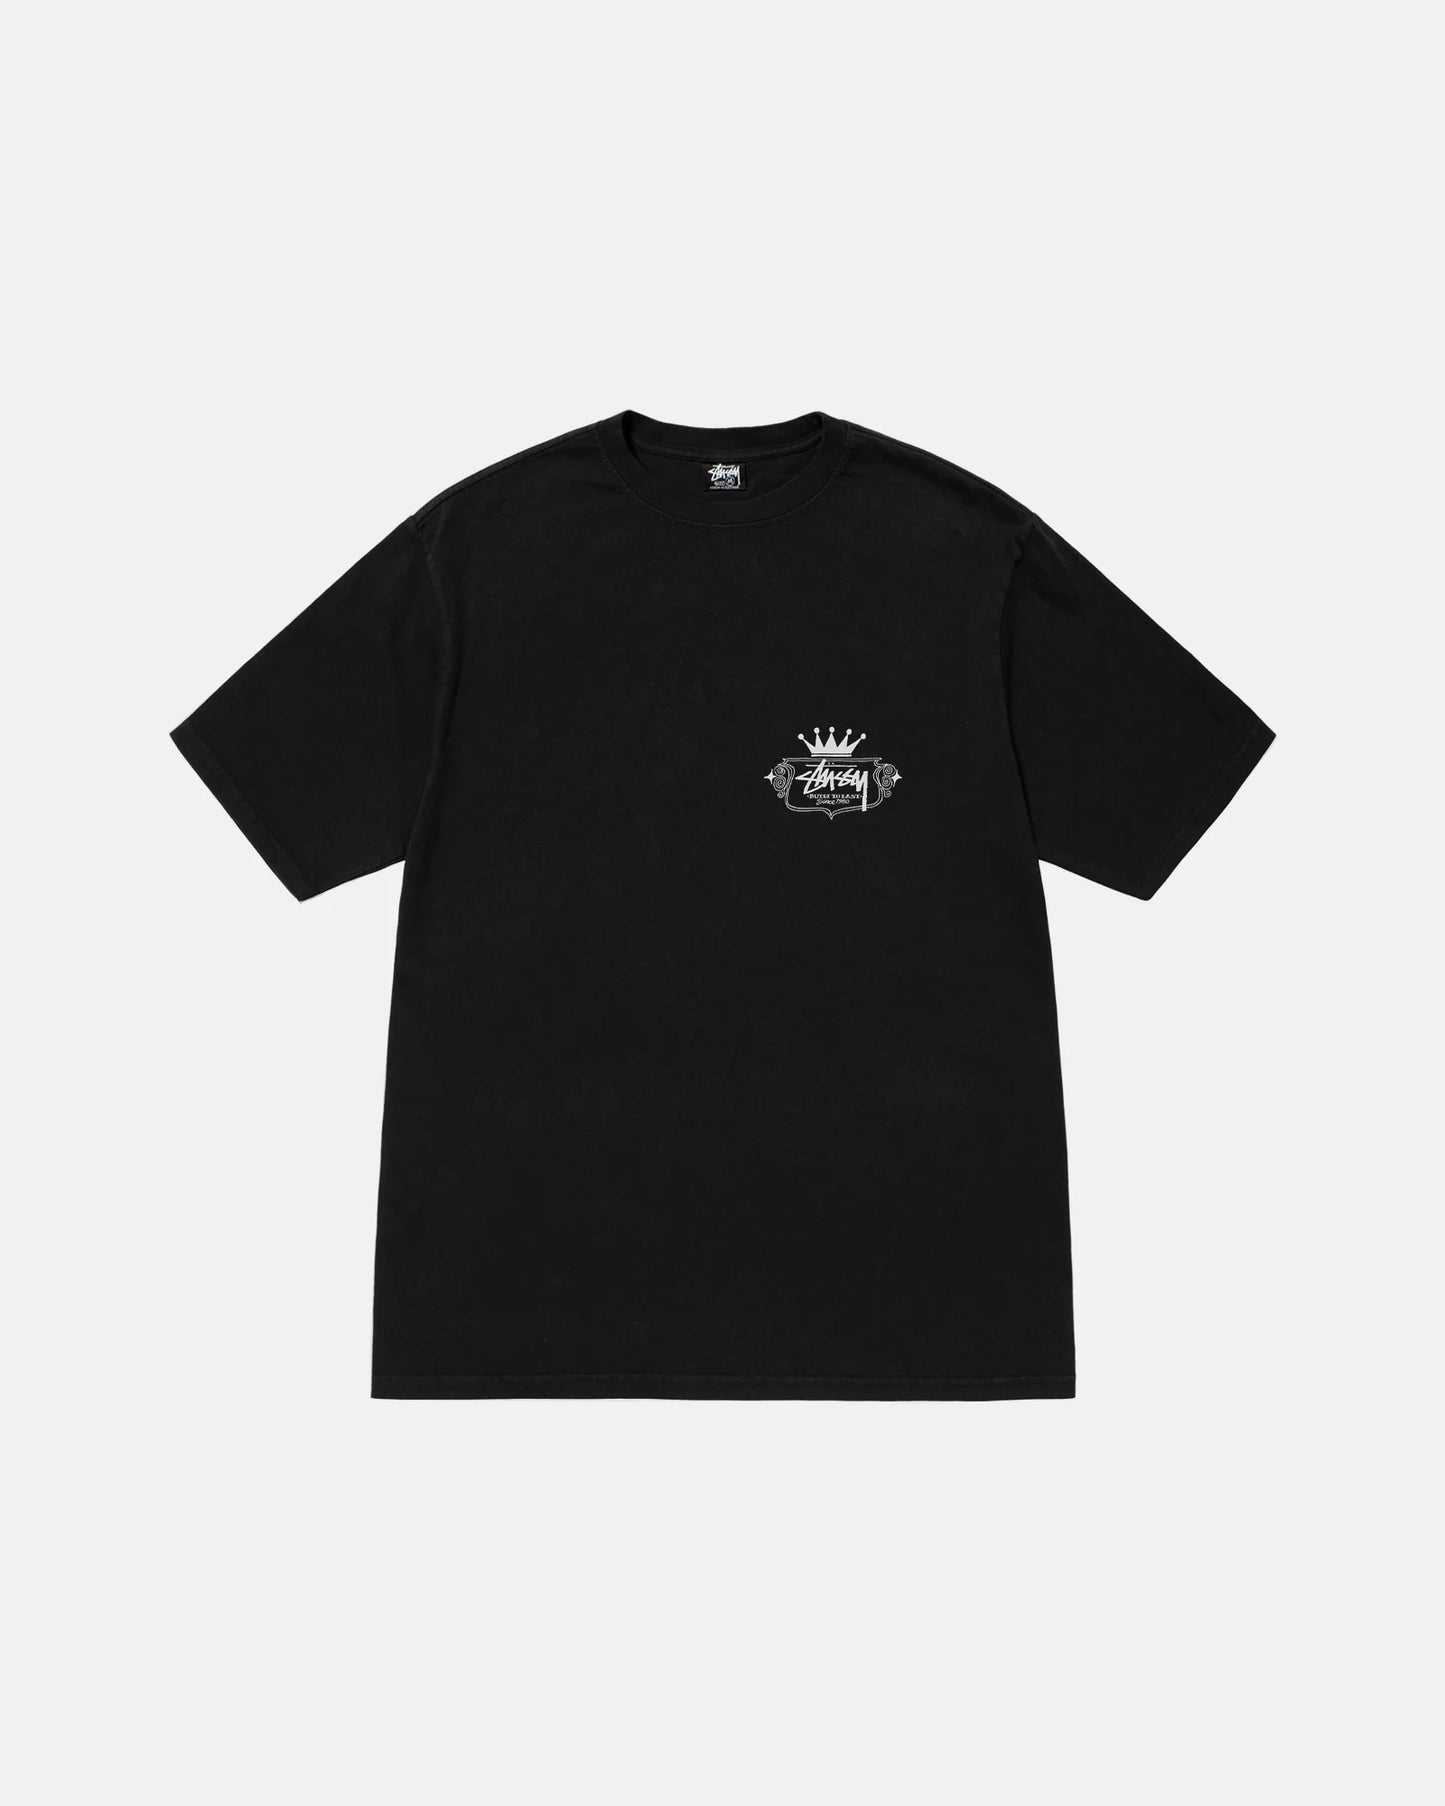 Stüssy Built To Last Tee Pigment Dyed Black